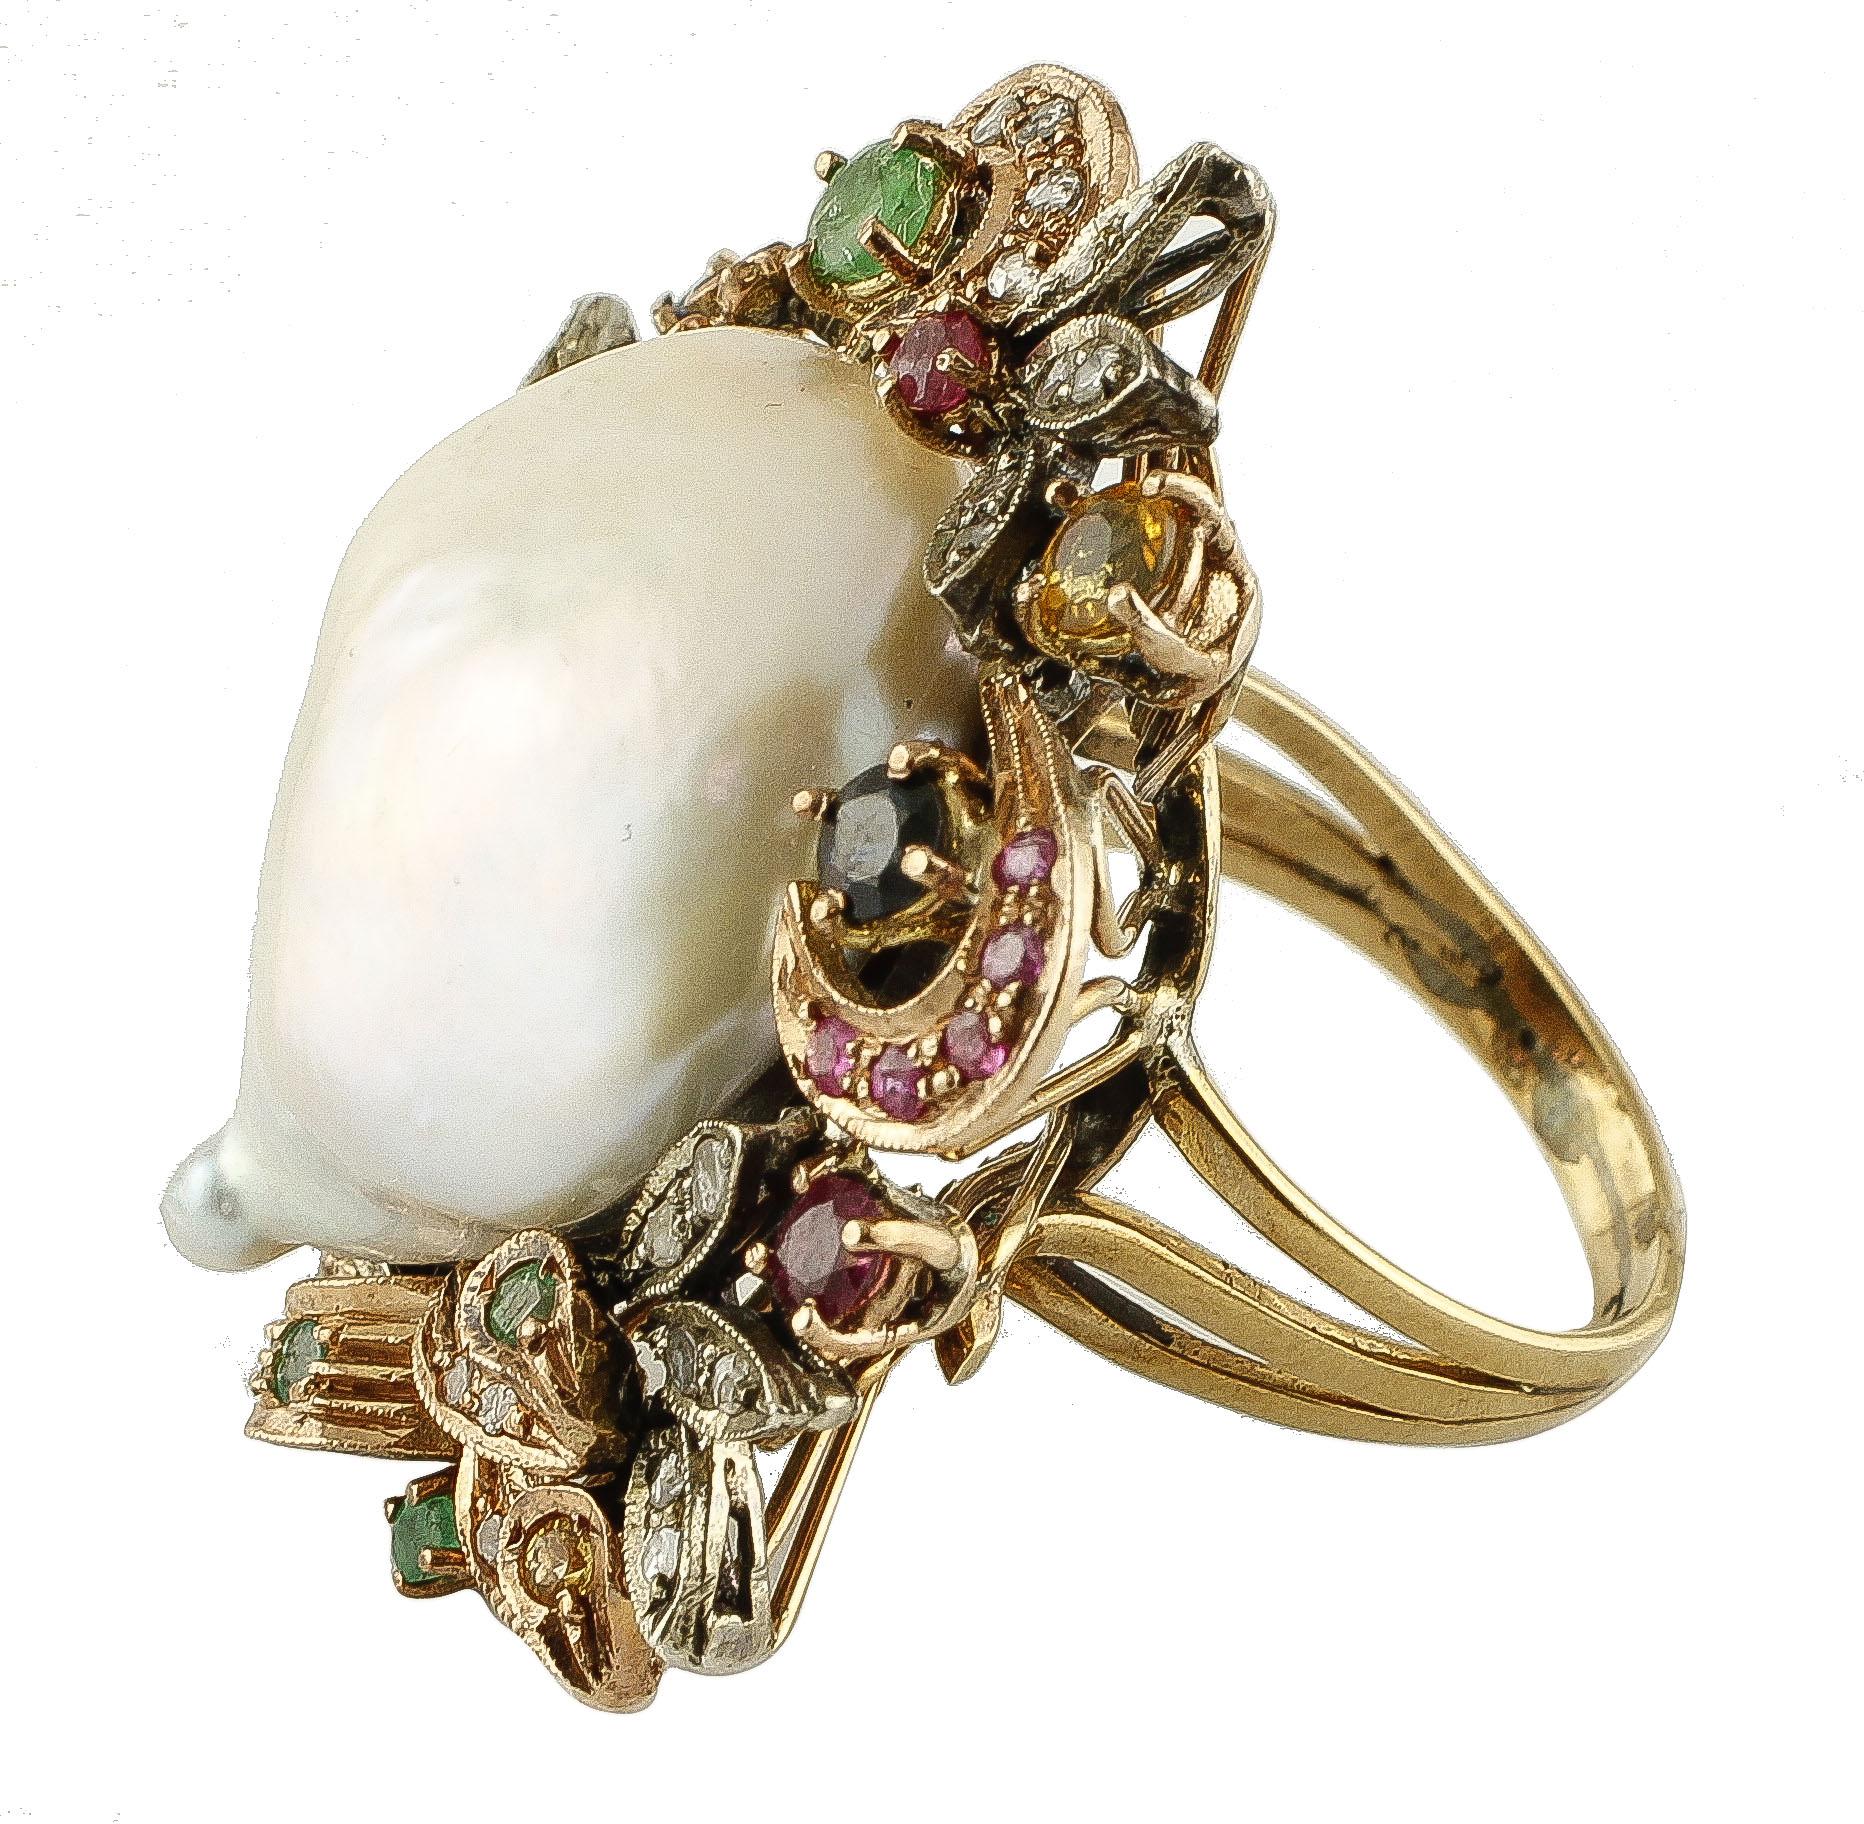 SHIPPING POLICY:
No additional costs will be added to this order.
Shipping costs will be totally covered by the seller (customs duties included).


Beautiful retro cocktail ring in 9k rose gold and silver structure, mounted with a big baroque pearl